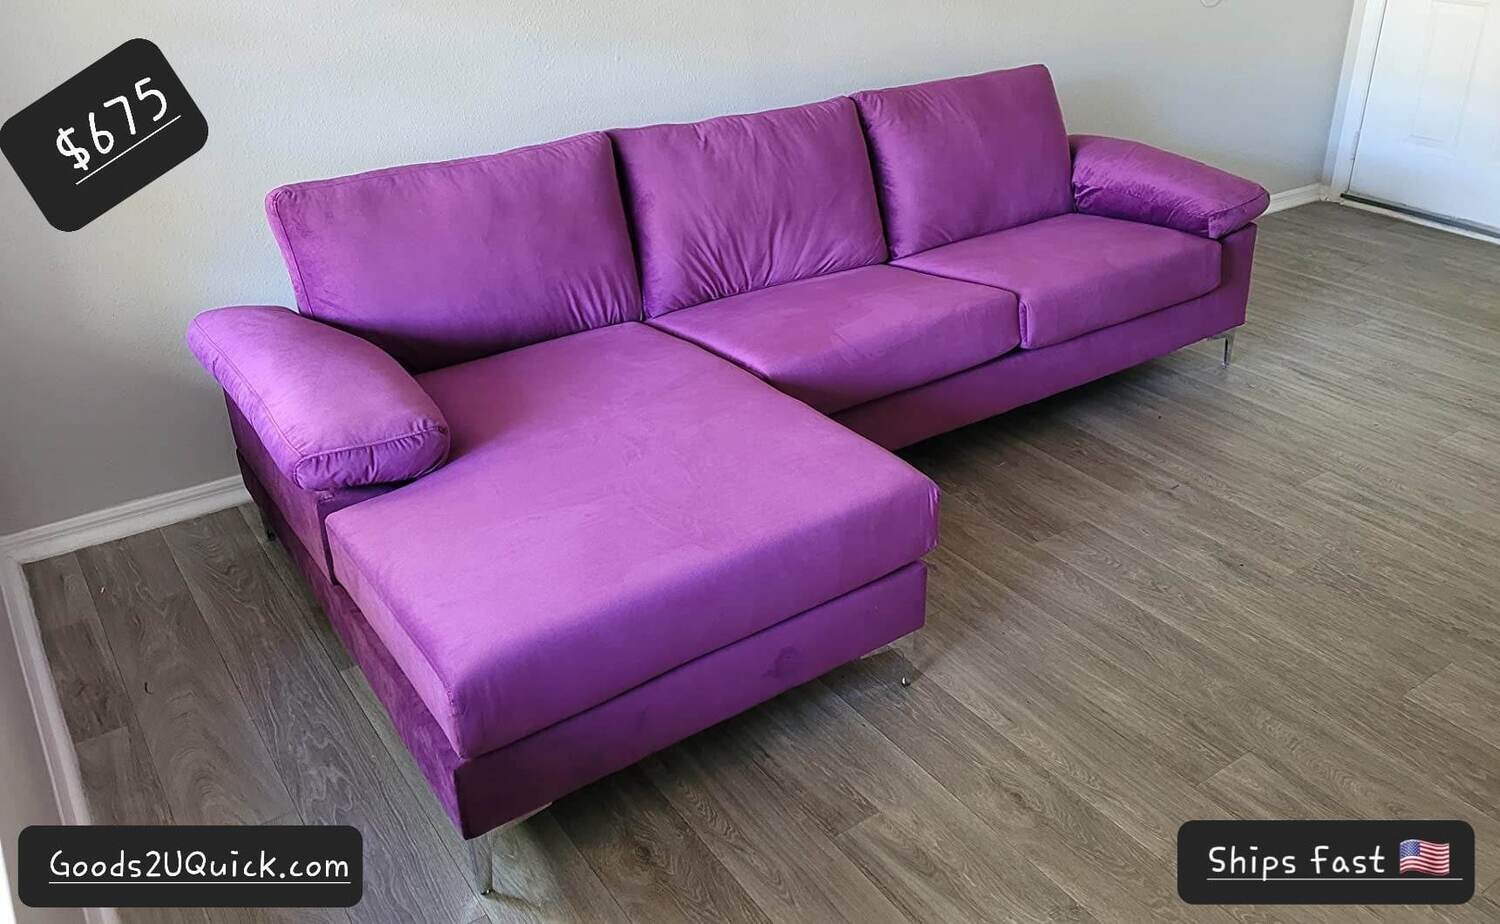 Modern Large Sectional Sofa L-Shape Couch with Silver Chrome Legs, Purple Sofa